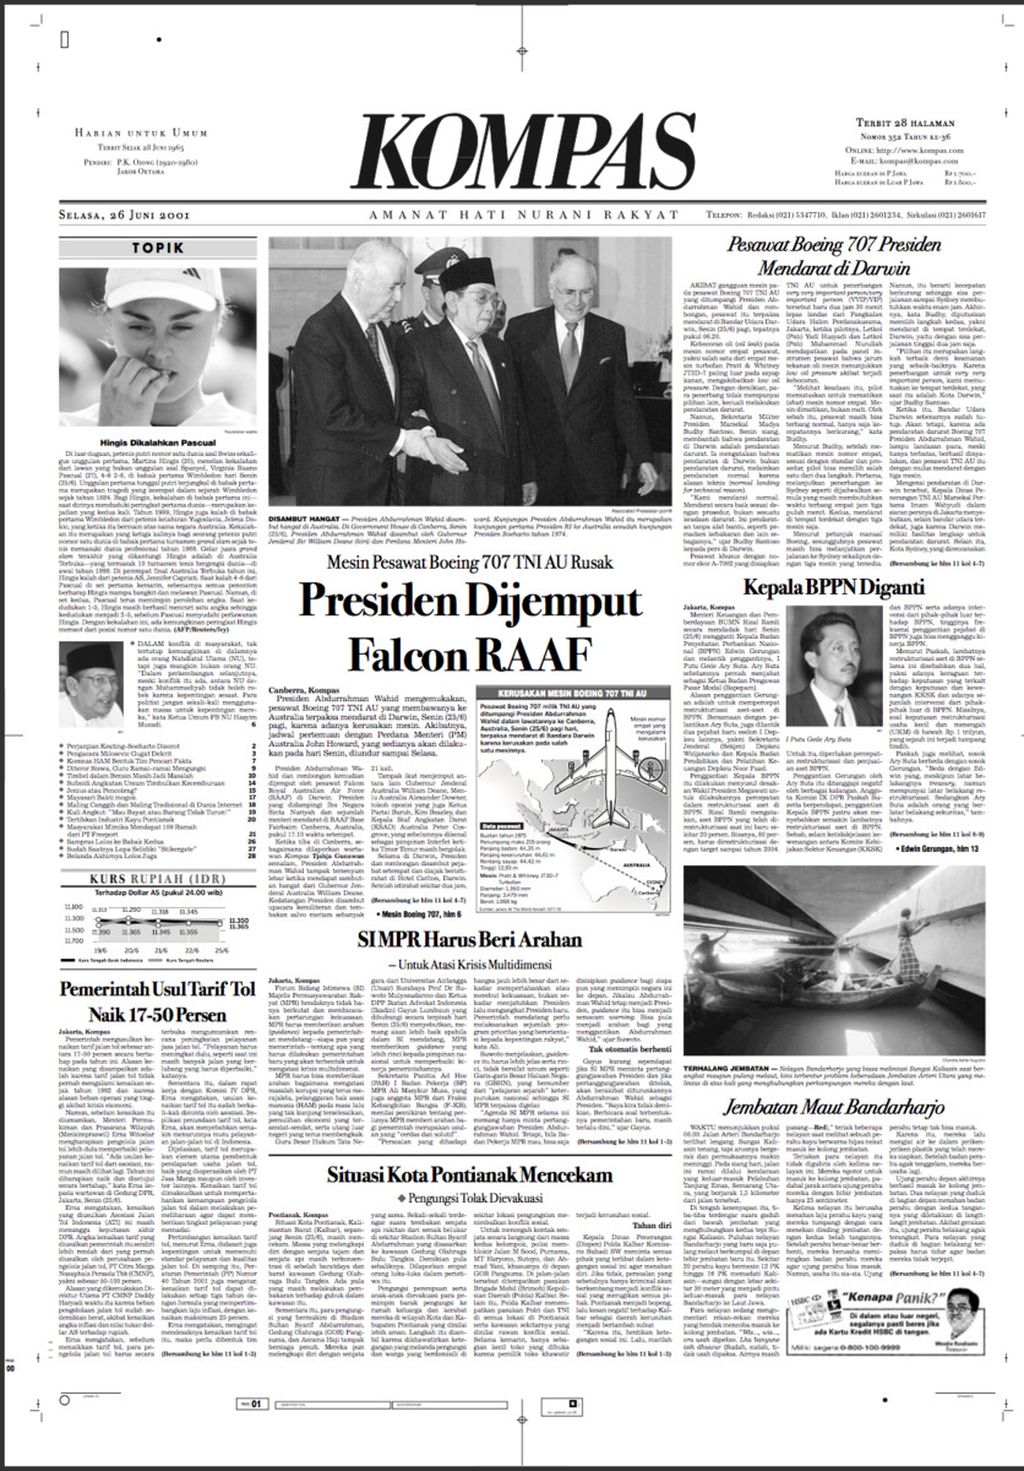 Page 1 of the daily Kompas, 26 June 2001, which carried a photo of President Abdurrahman Wahid's visit to Canberra, Australia, and was greeted by Australian Prime Minister John Howard.